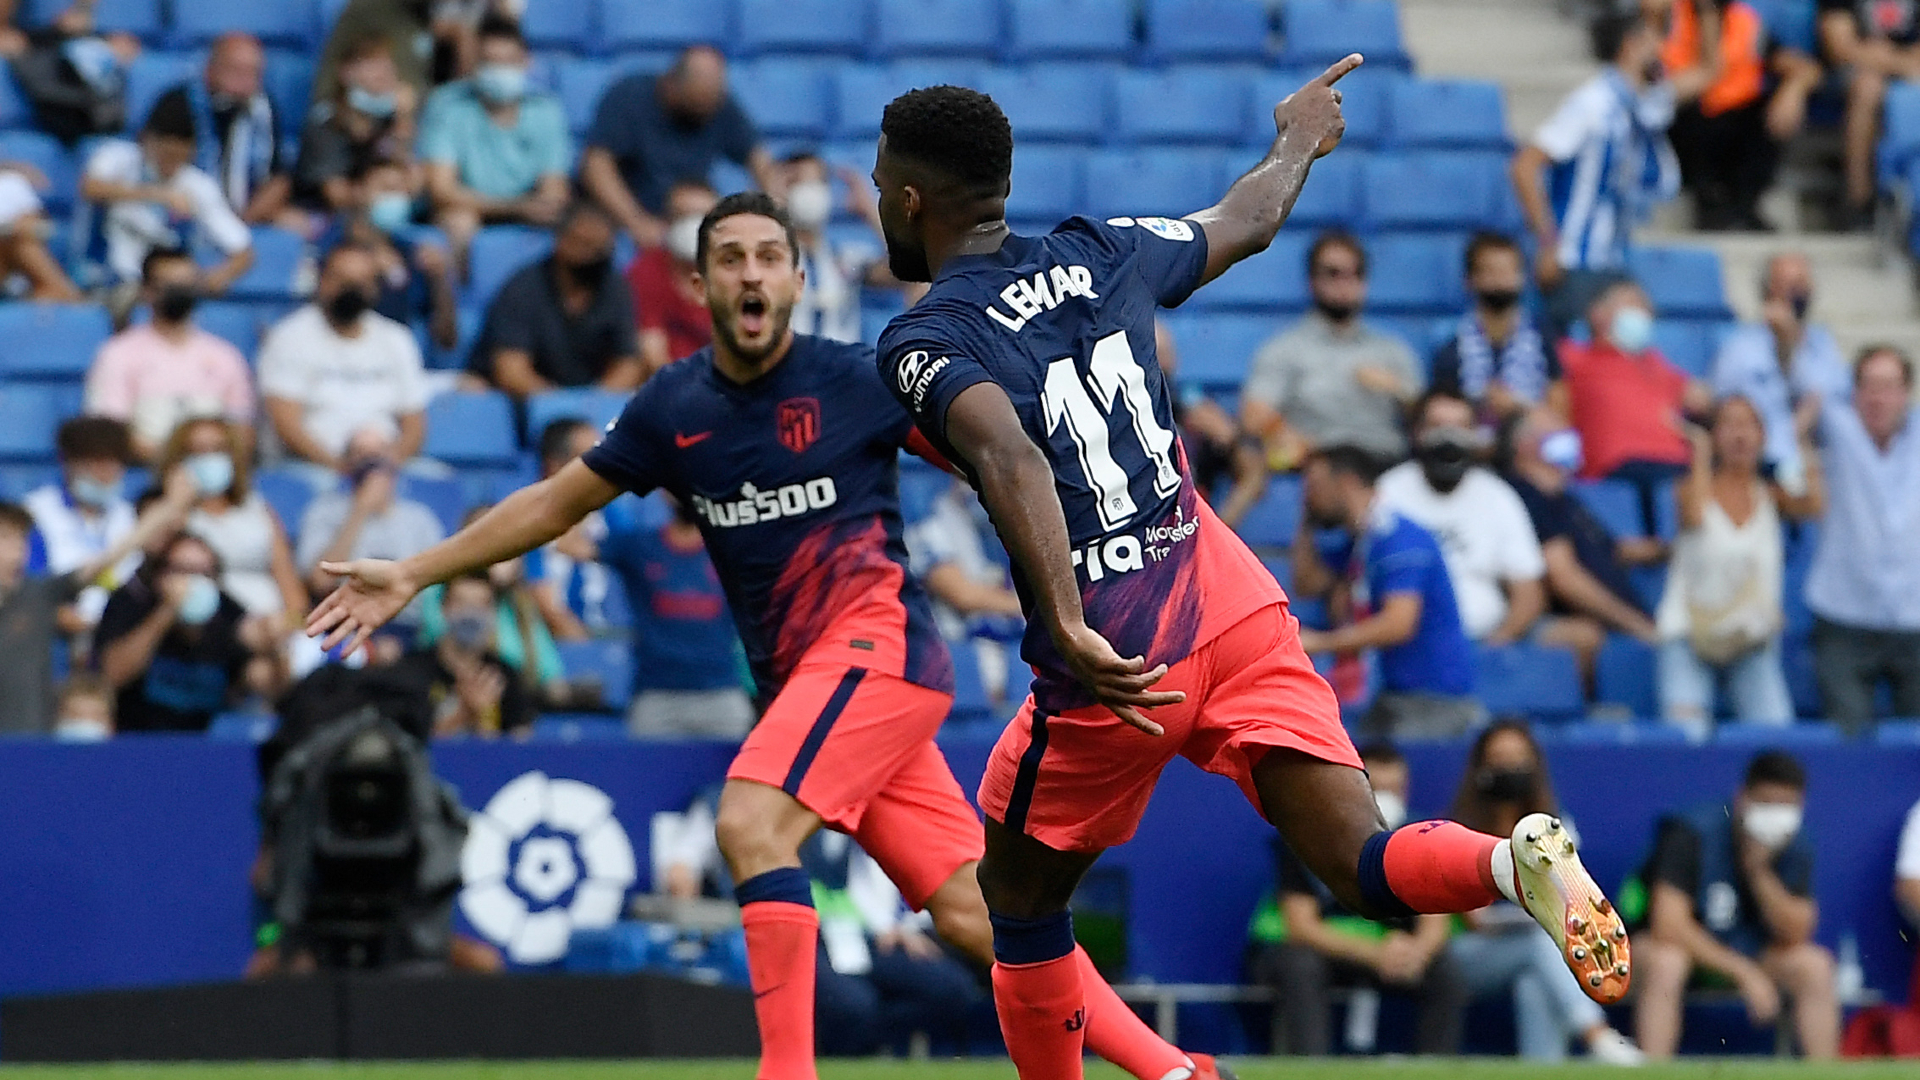 Espanyol 1-2 Atletico Madrid: Lemar completes dramatic comeback on Griezmann's second debut